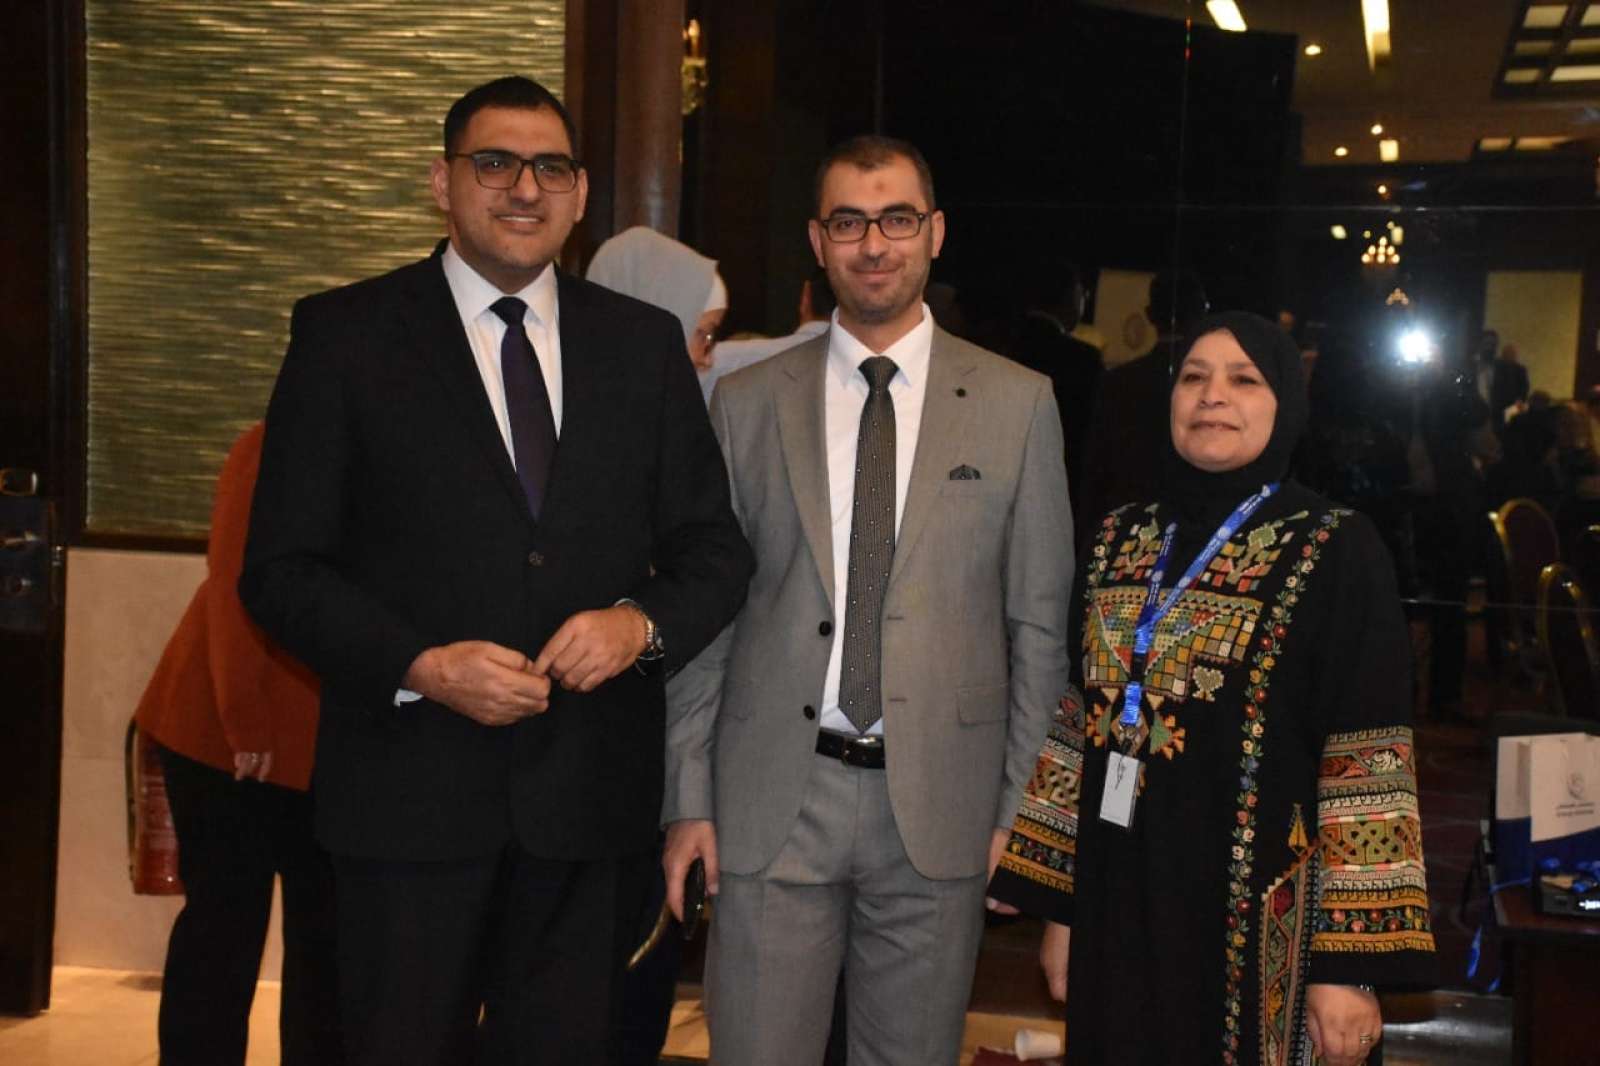 Istiklal Hospital held its annual Ramadan breakfast on Tuesday, 17 Ramadan, at the Crowne Plaza Hotel, where it hosted nearly 300 guests of doctors, partners, and national figures to celebrate Ramadan